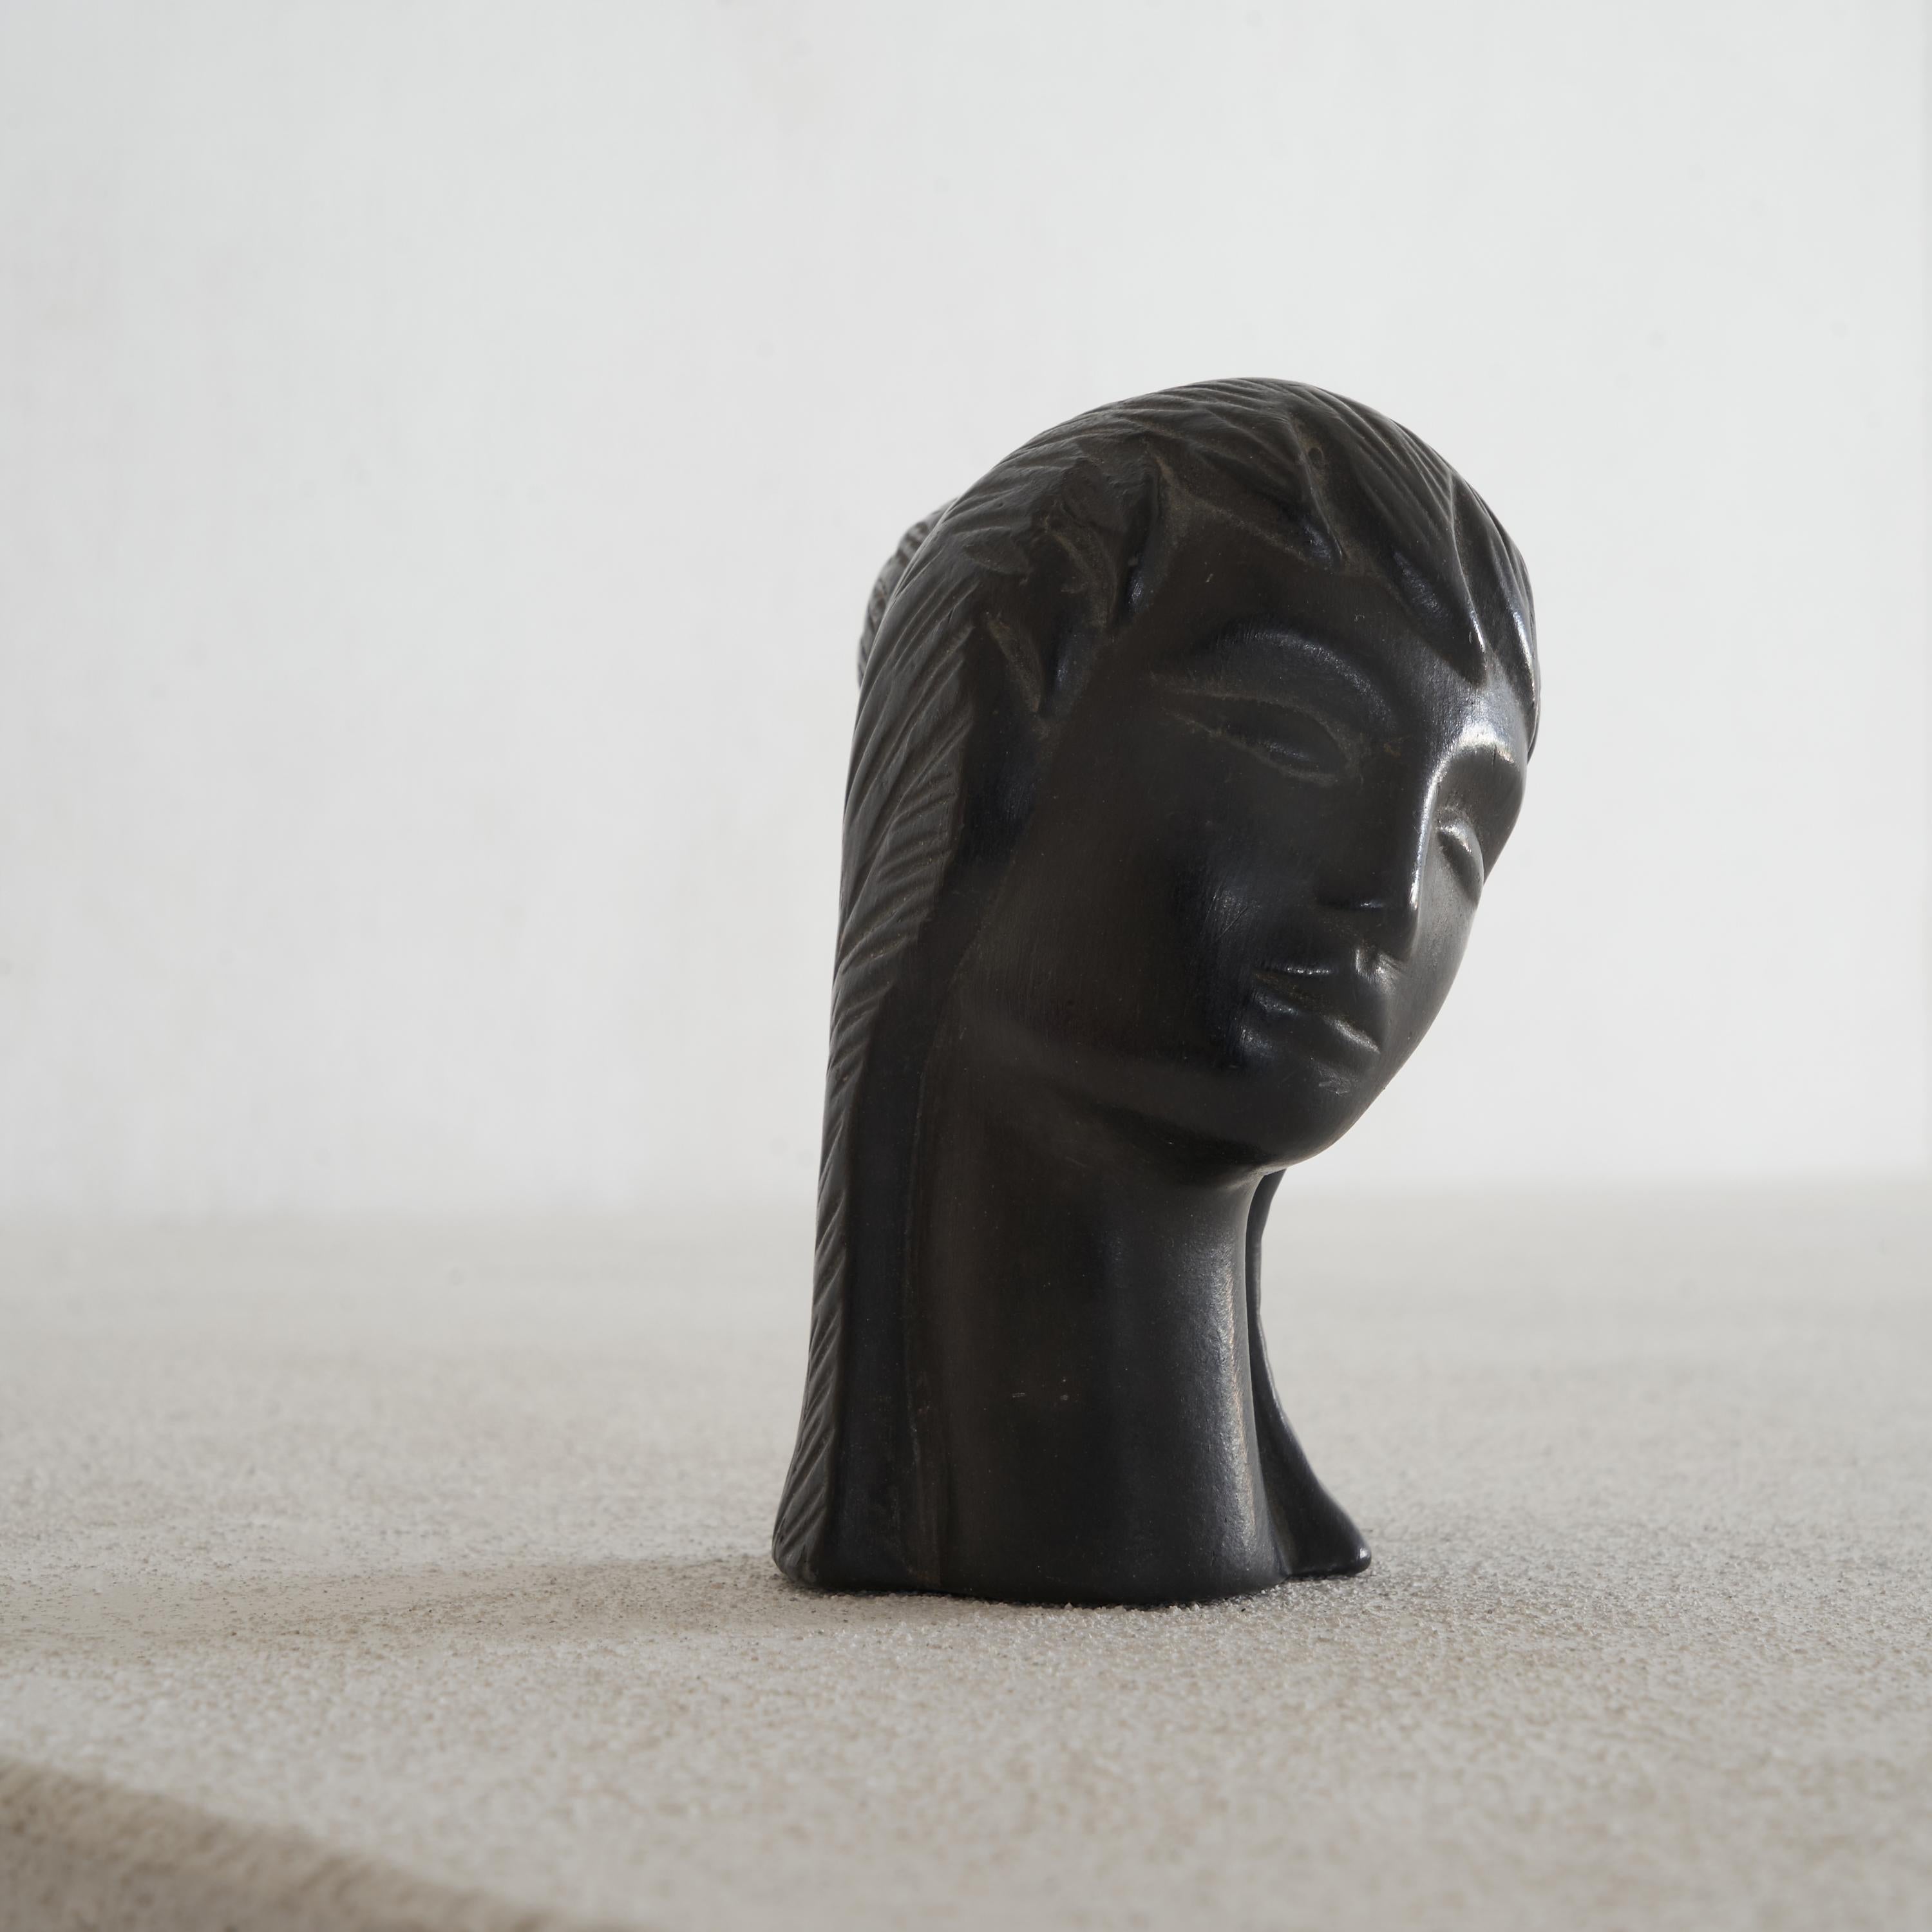 This is a rare and marvelous little mid century ceramic head by Carlo Alberto Rossi after a design attributed to Giò Ponti. Very stylistic and interesting sculpture. Although it is small, this head is a real conversation piece to sit on your desk or